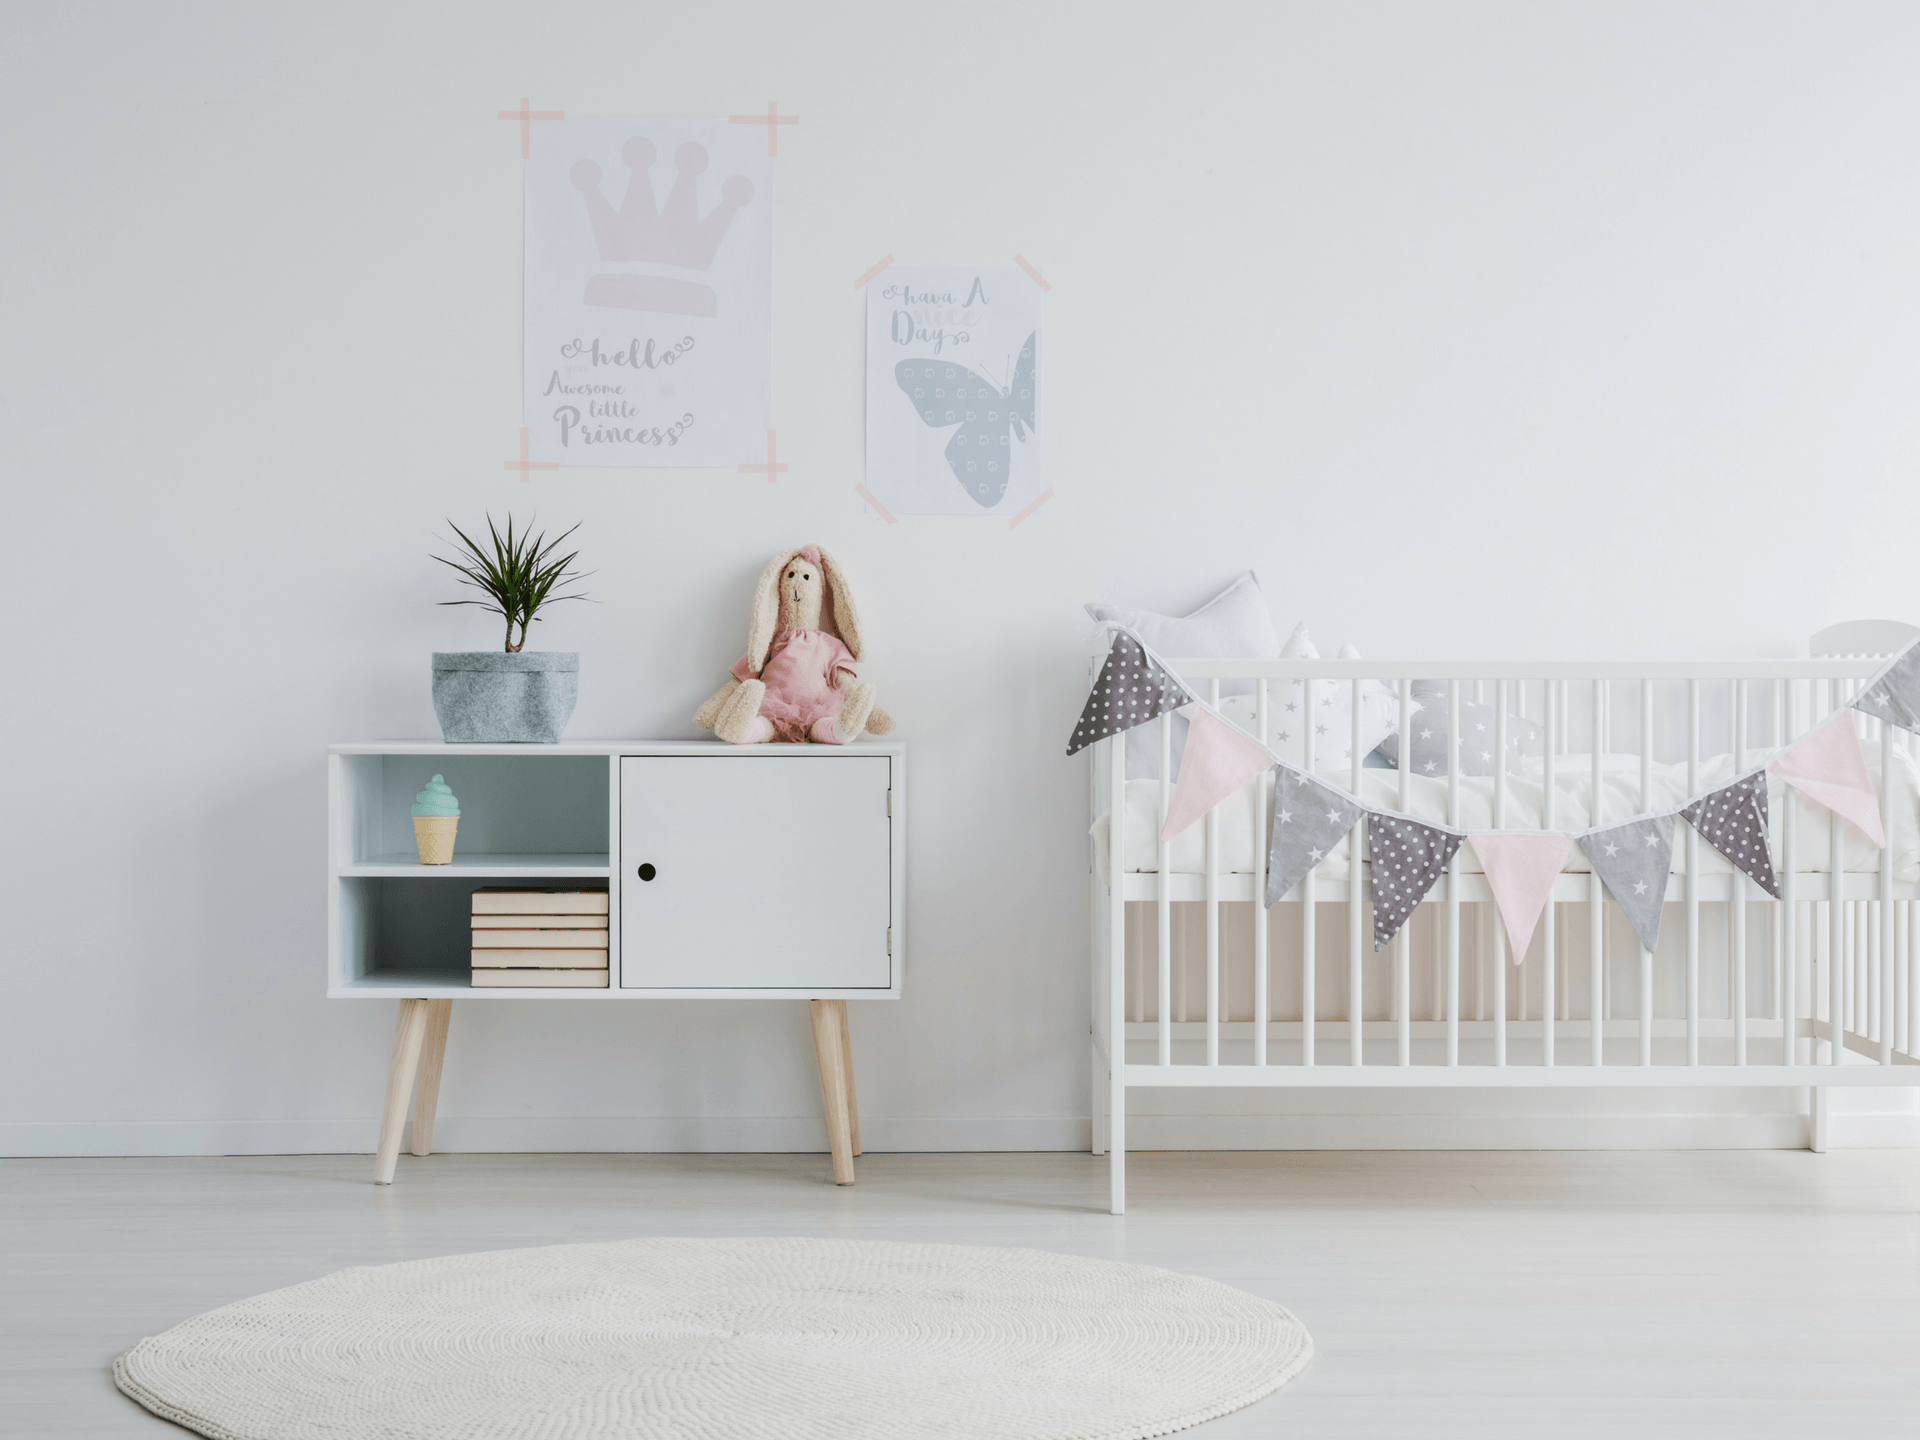 7 Nursery Decor Ideas for Girls: Pink and Gray Theme